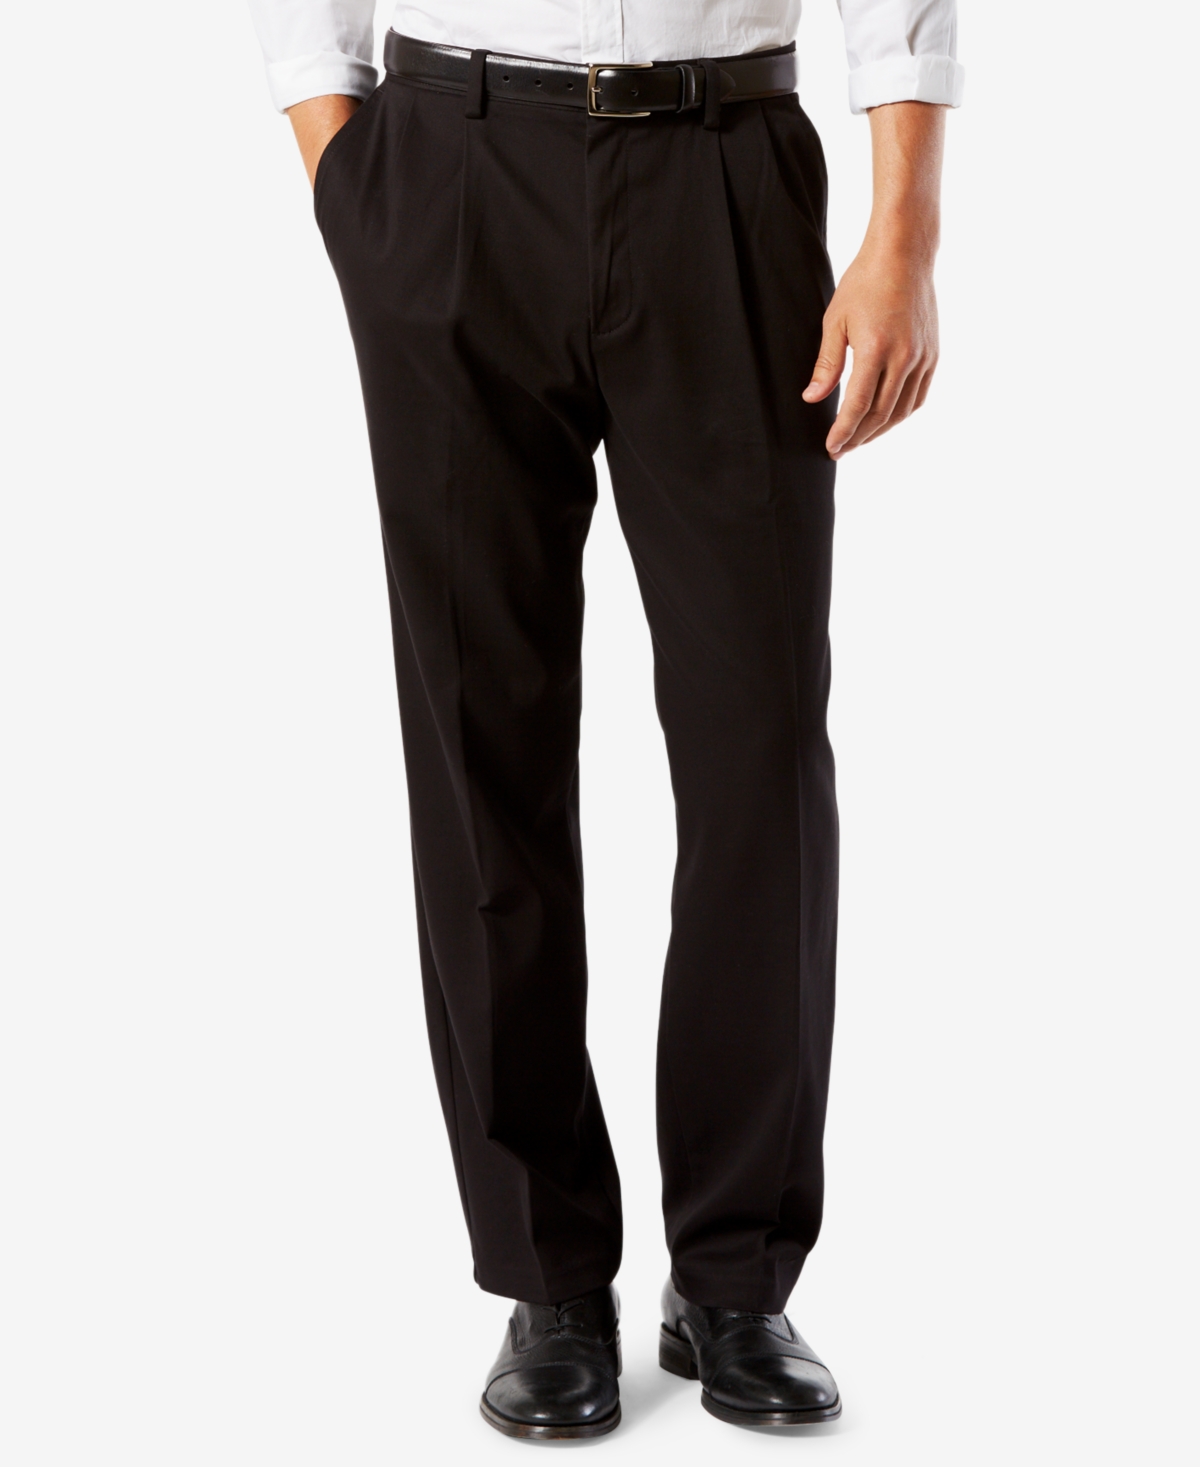 Men's Easy Classic Pleated Fit Khaki Stretch Pants - Coffee Bean